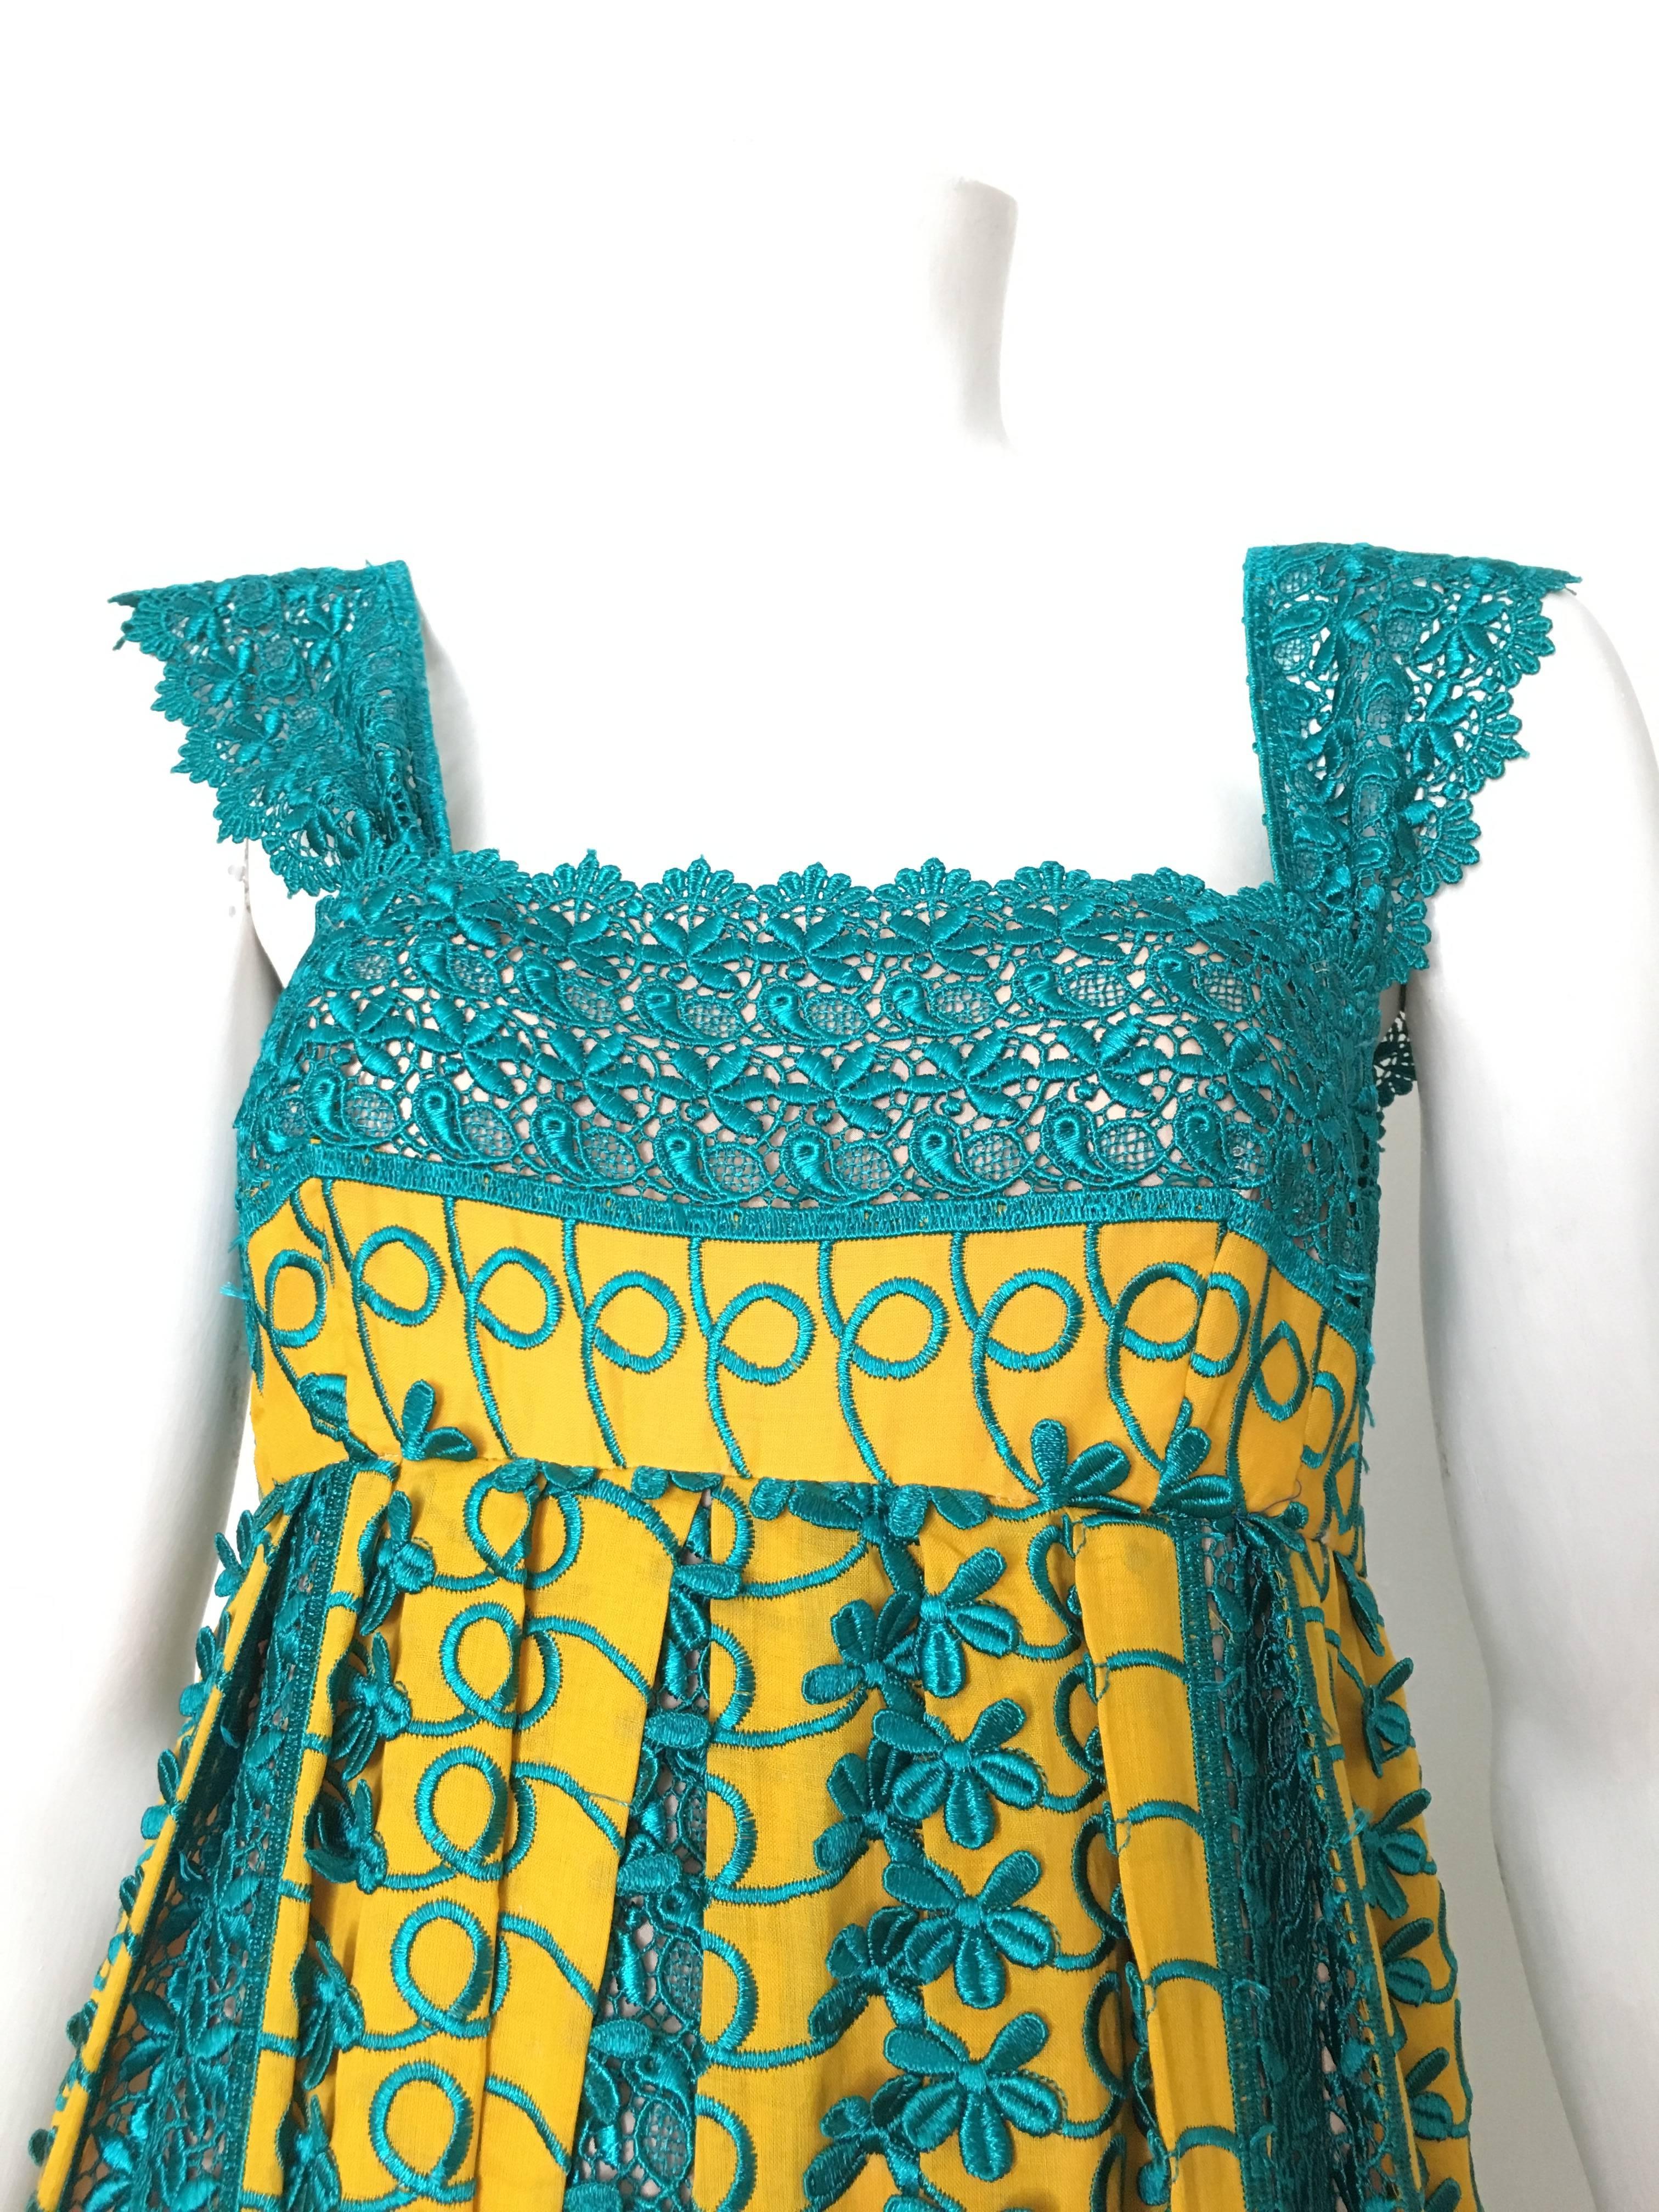 Tracy Feith turquoise / yellow lace & cotton sleeveless dress fits like an USA size 4.  Matilda the Mannequin is a size 4 and it fits her perfectly. Ladies please grab your tape measure and measure your bust, waist and hips to make certain this will